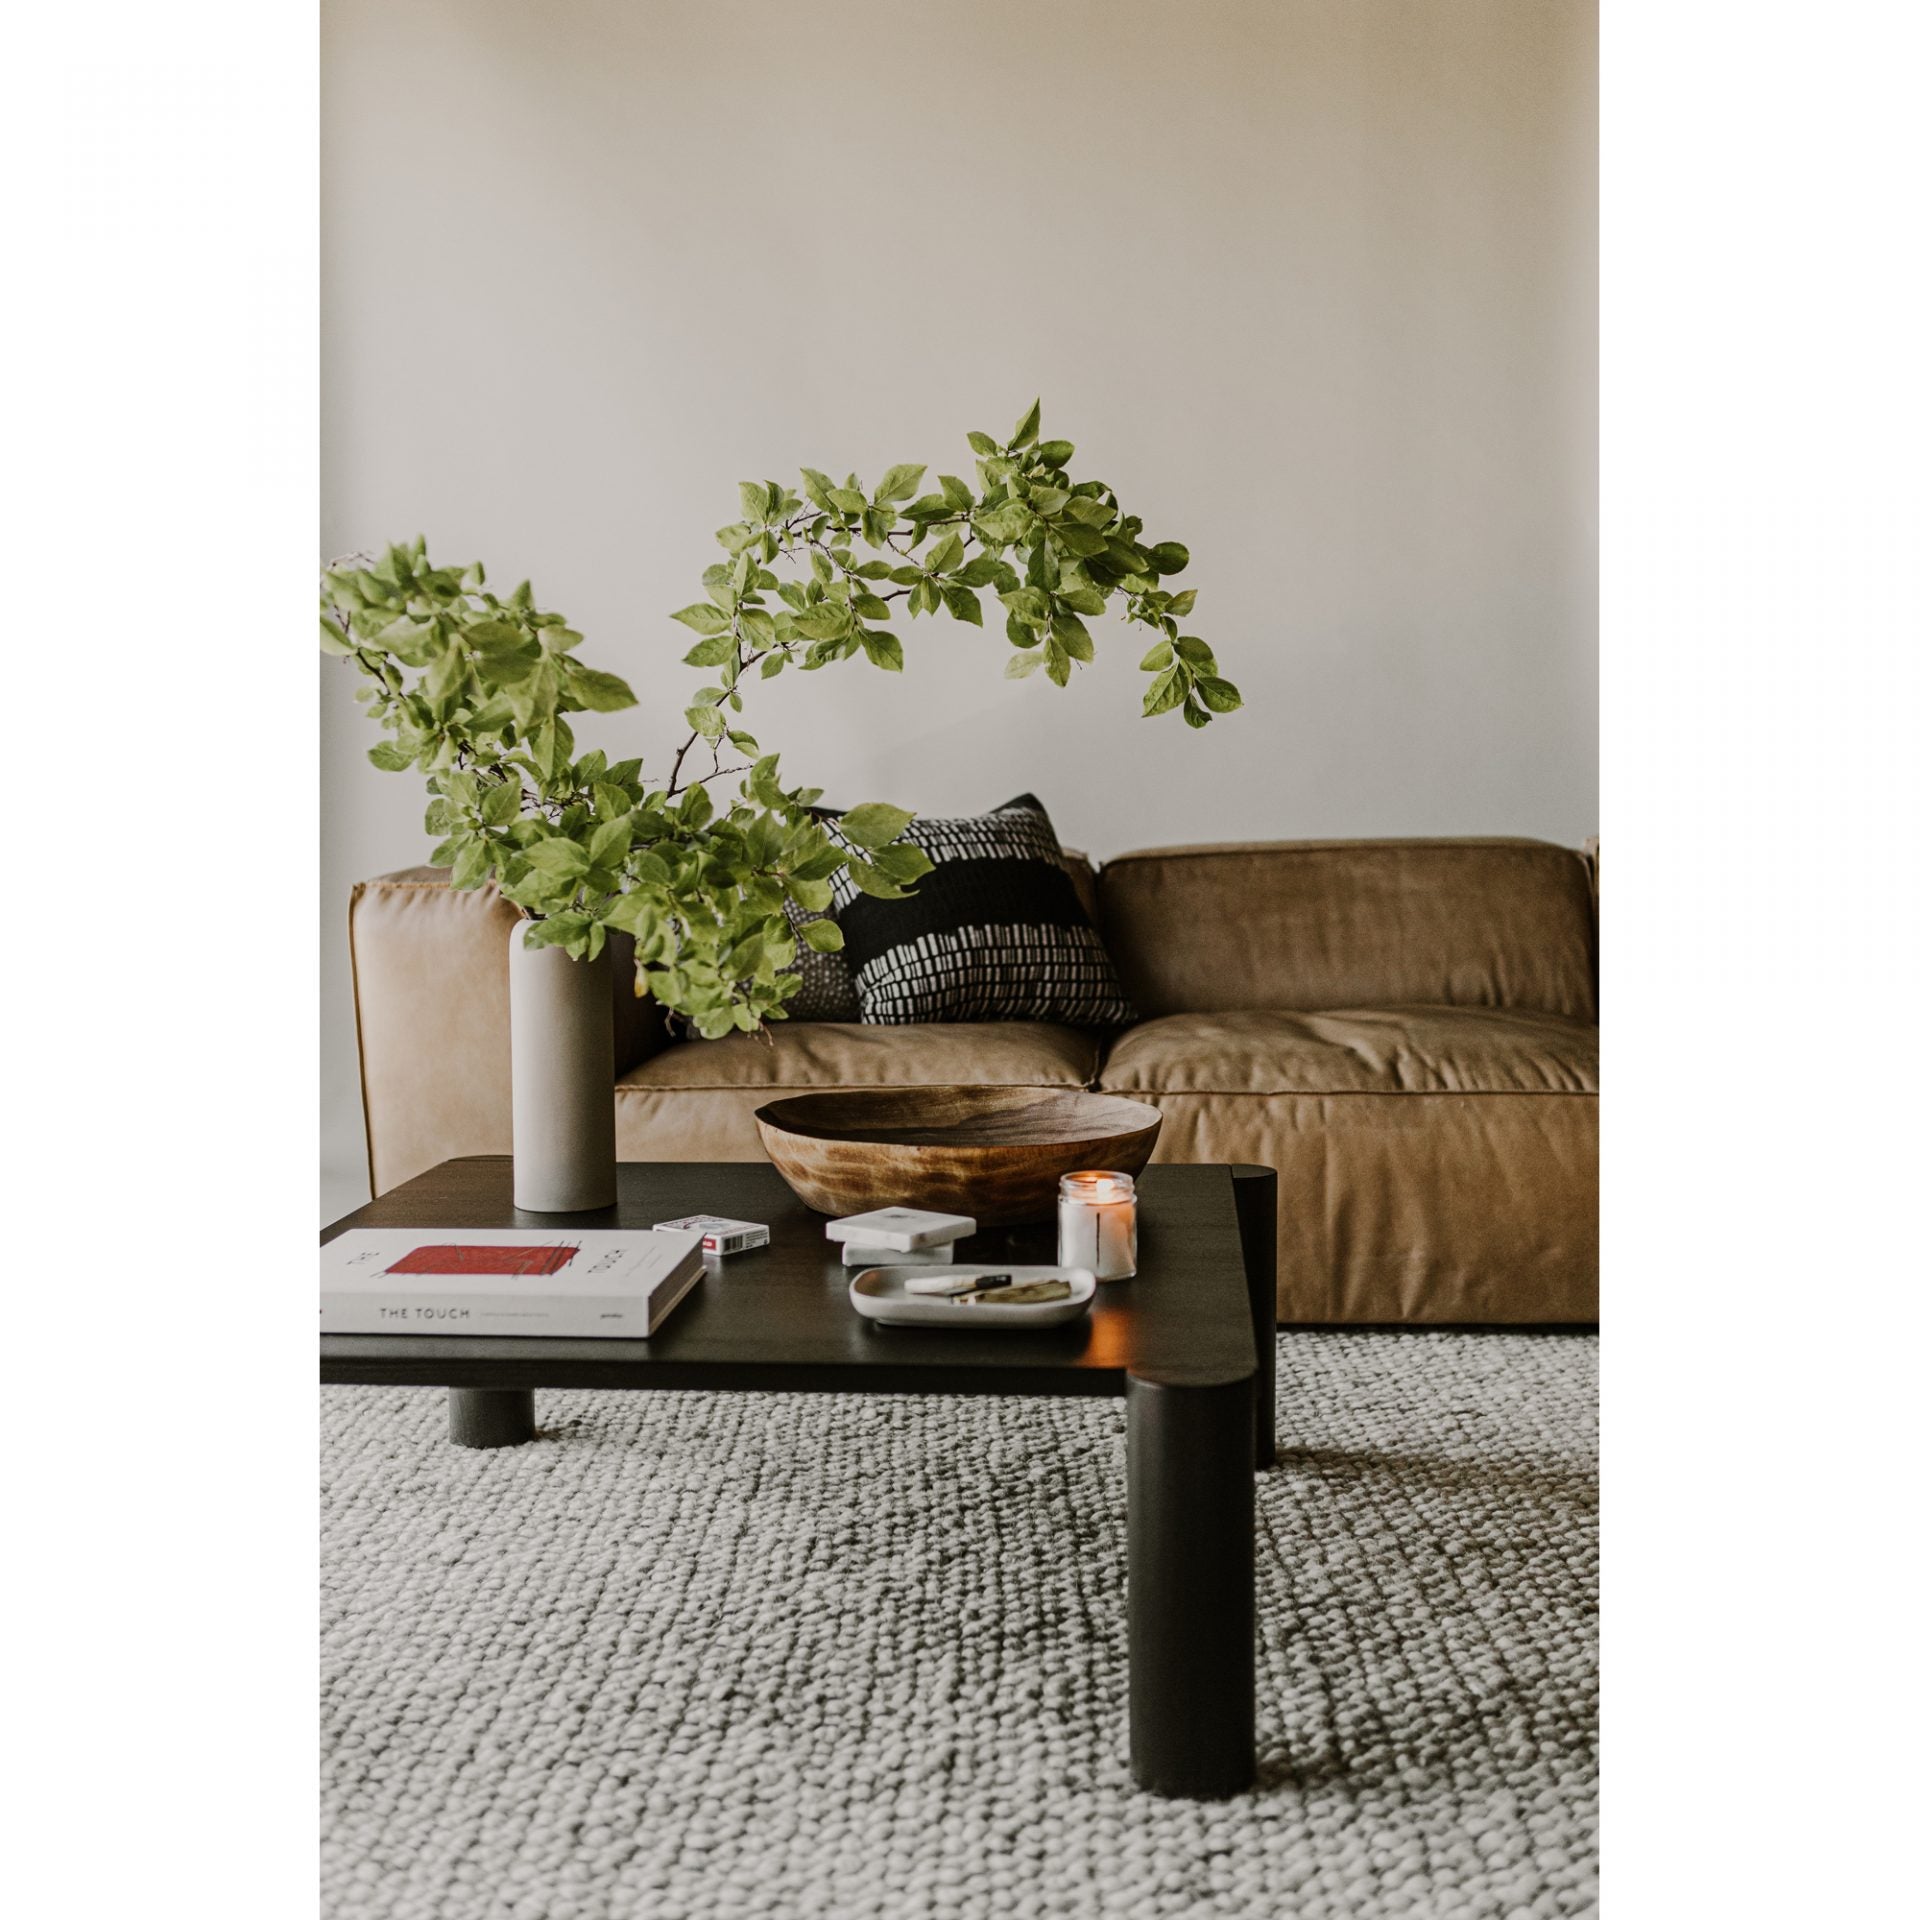 We love the unique legs found on this Post Coffee Table - Black Oak. Made from solid oak, this coffee table sits lower to the ground, inviting more communication on its sturdy dowel legs.  Dimensions: 36"W x 36"D x 13"H Materials:  Solid Oak